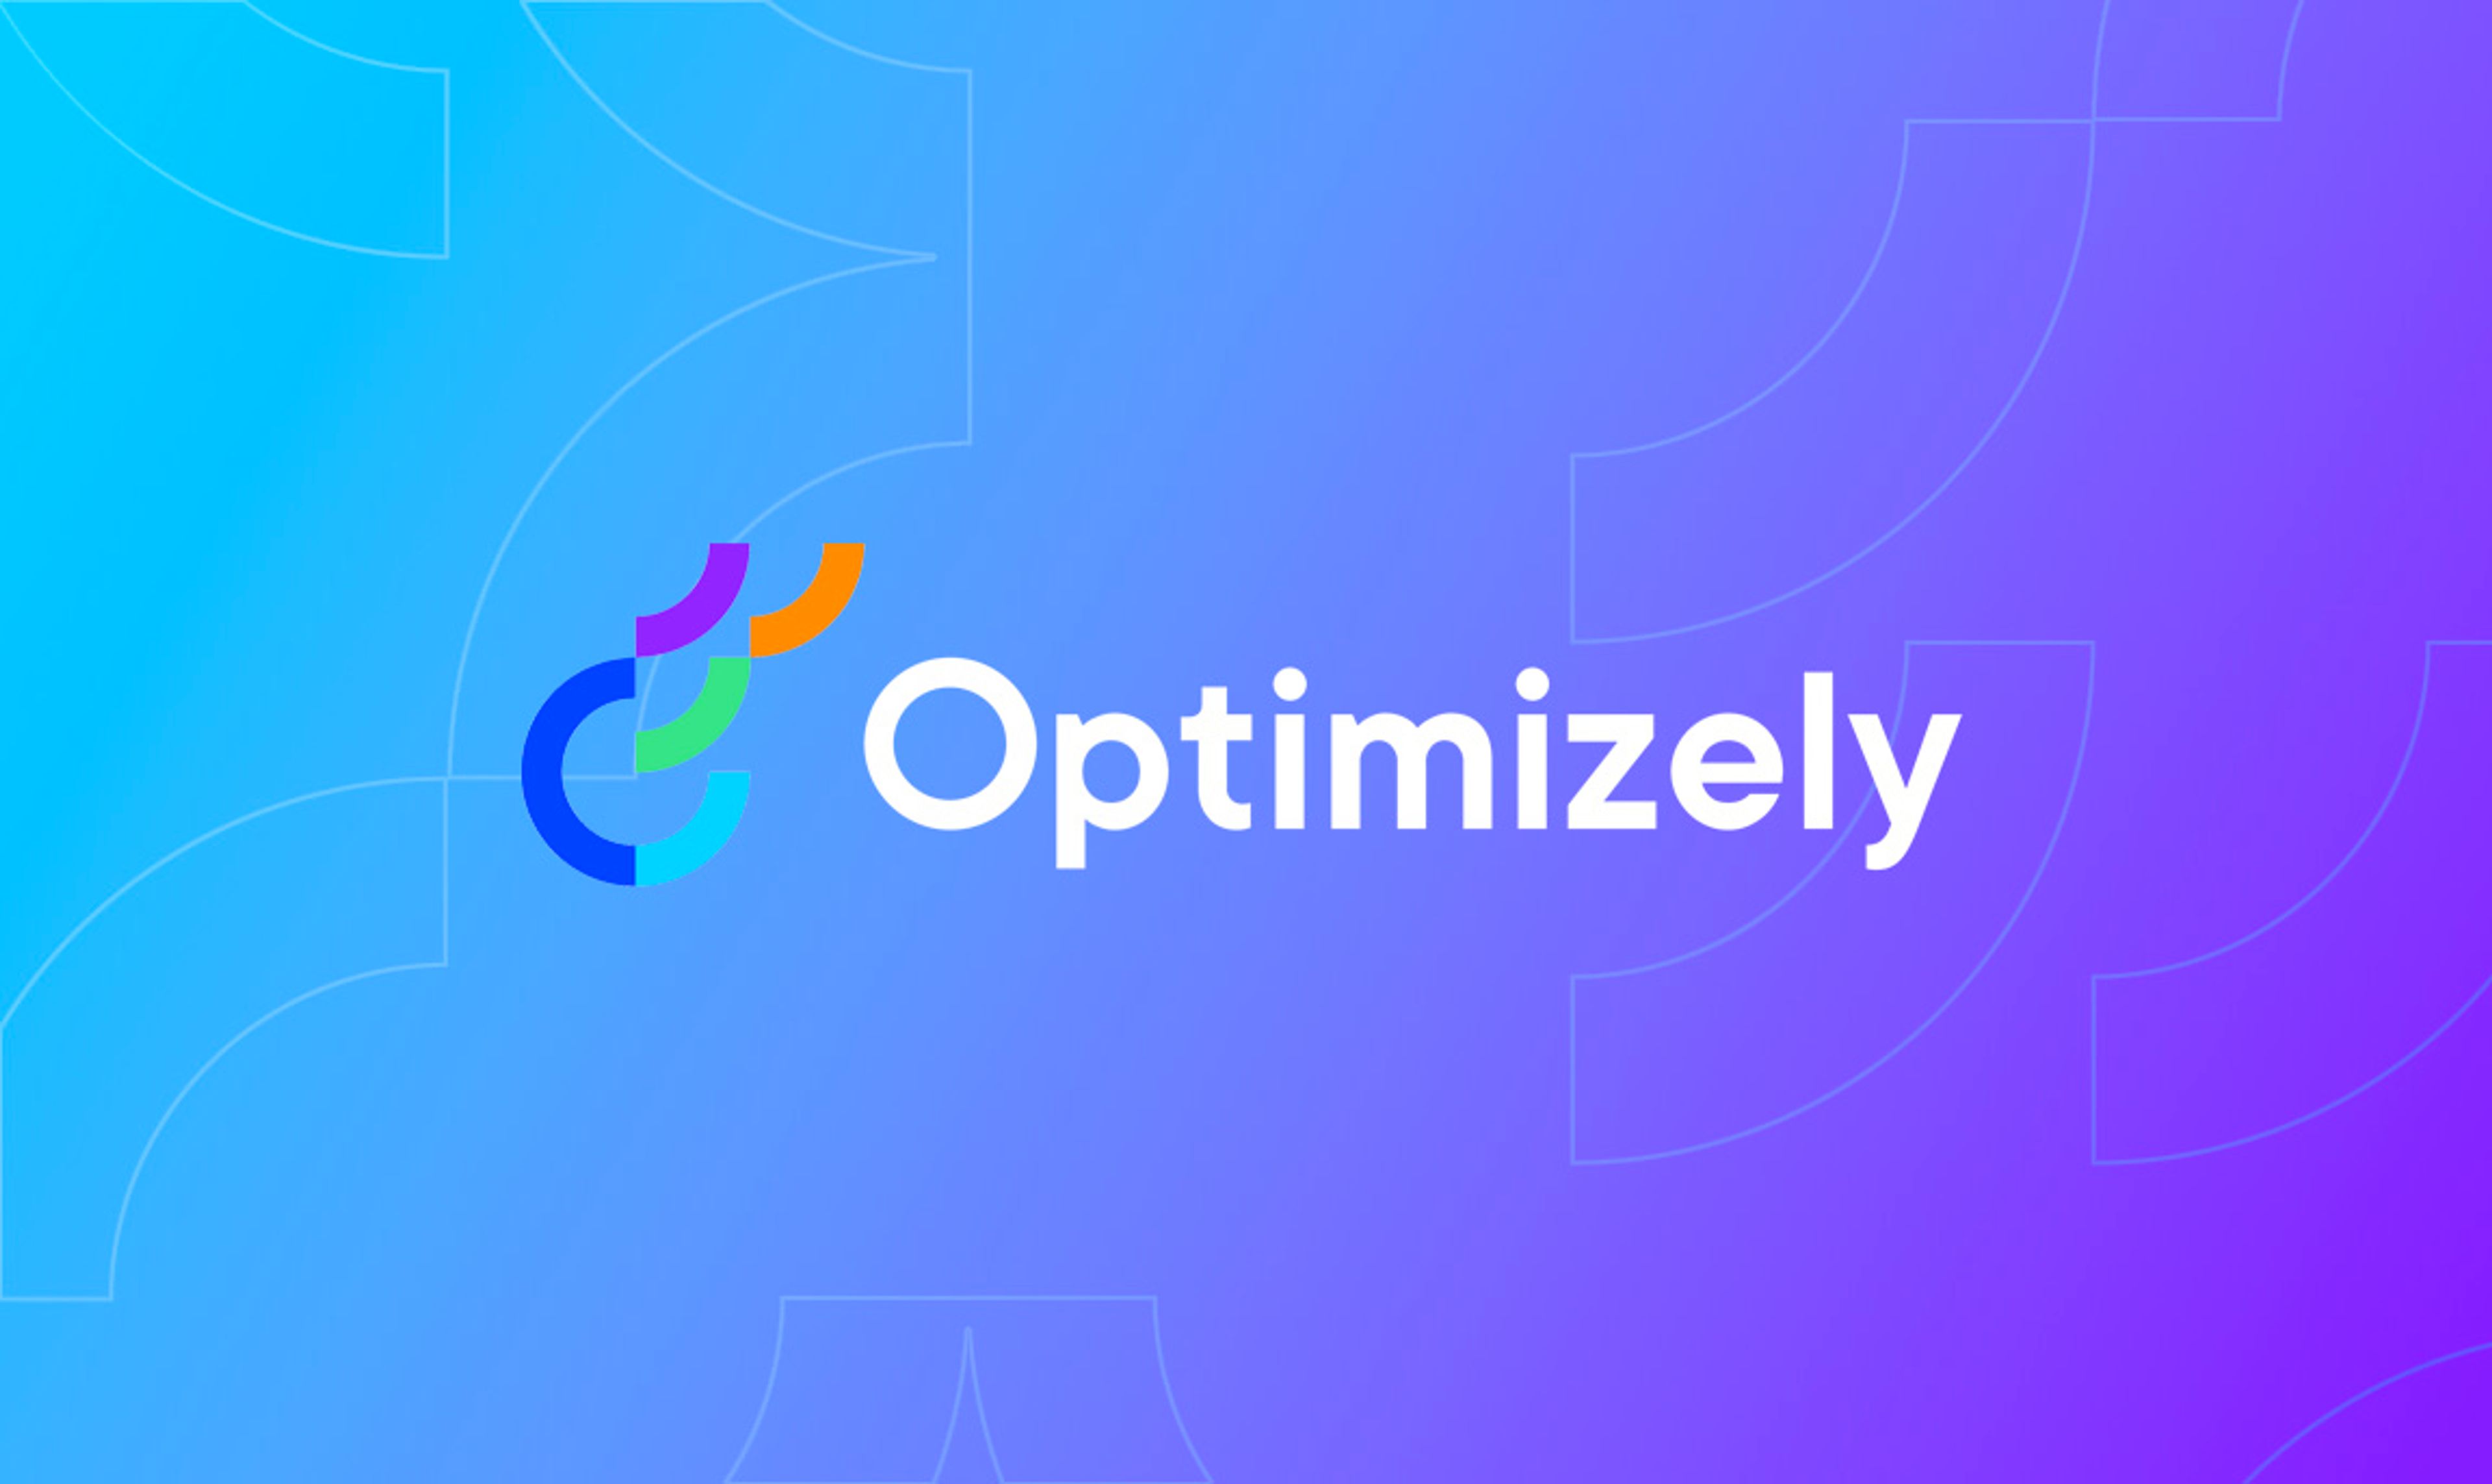 Optimizely logo against a blue background.